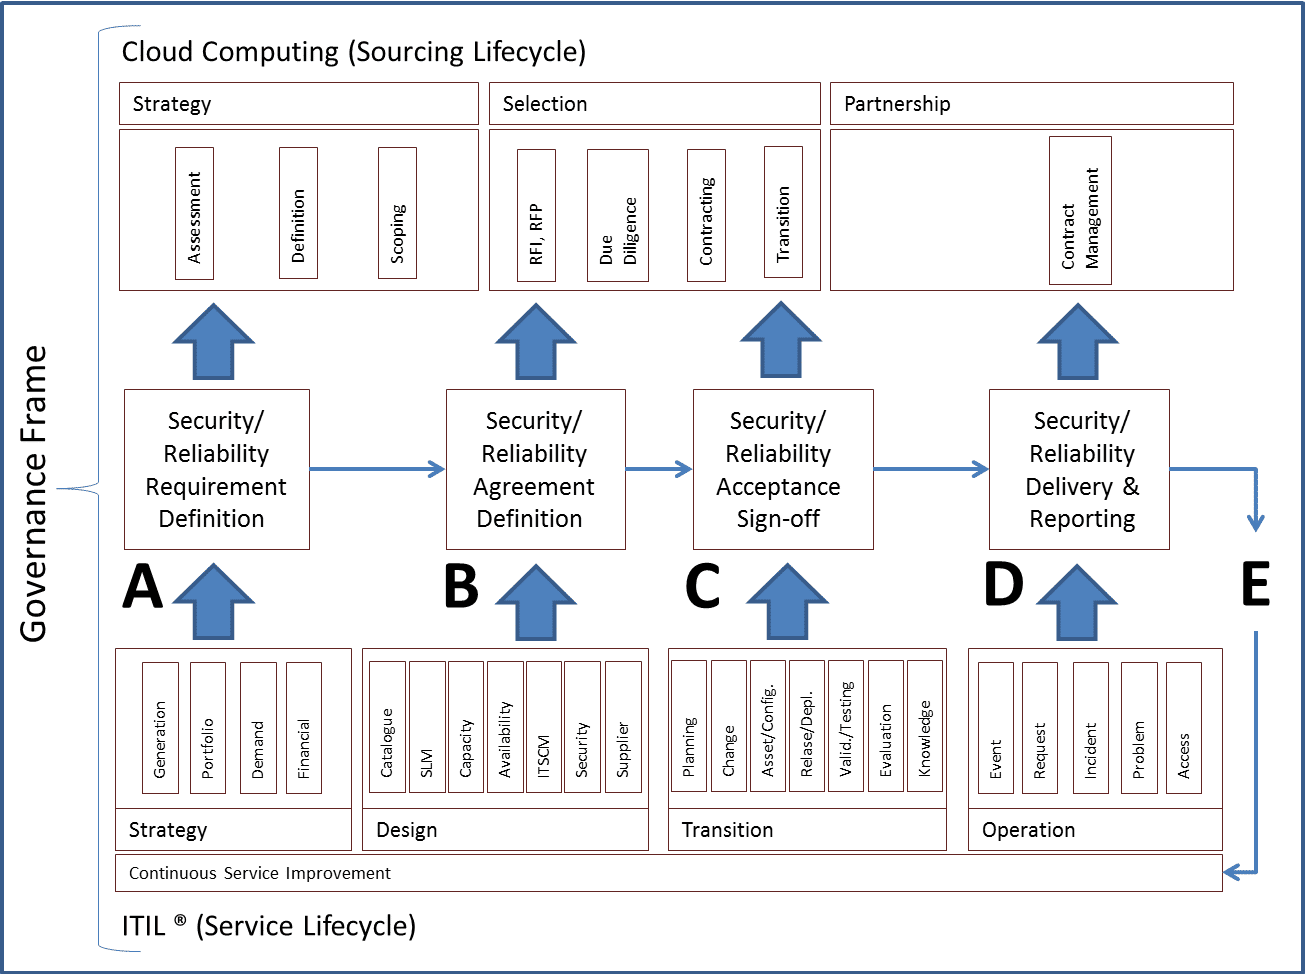  This image shows a diagram of the cloud governance framework, which includes five stages: strategy, selection, partnership, governance, and operation.